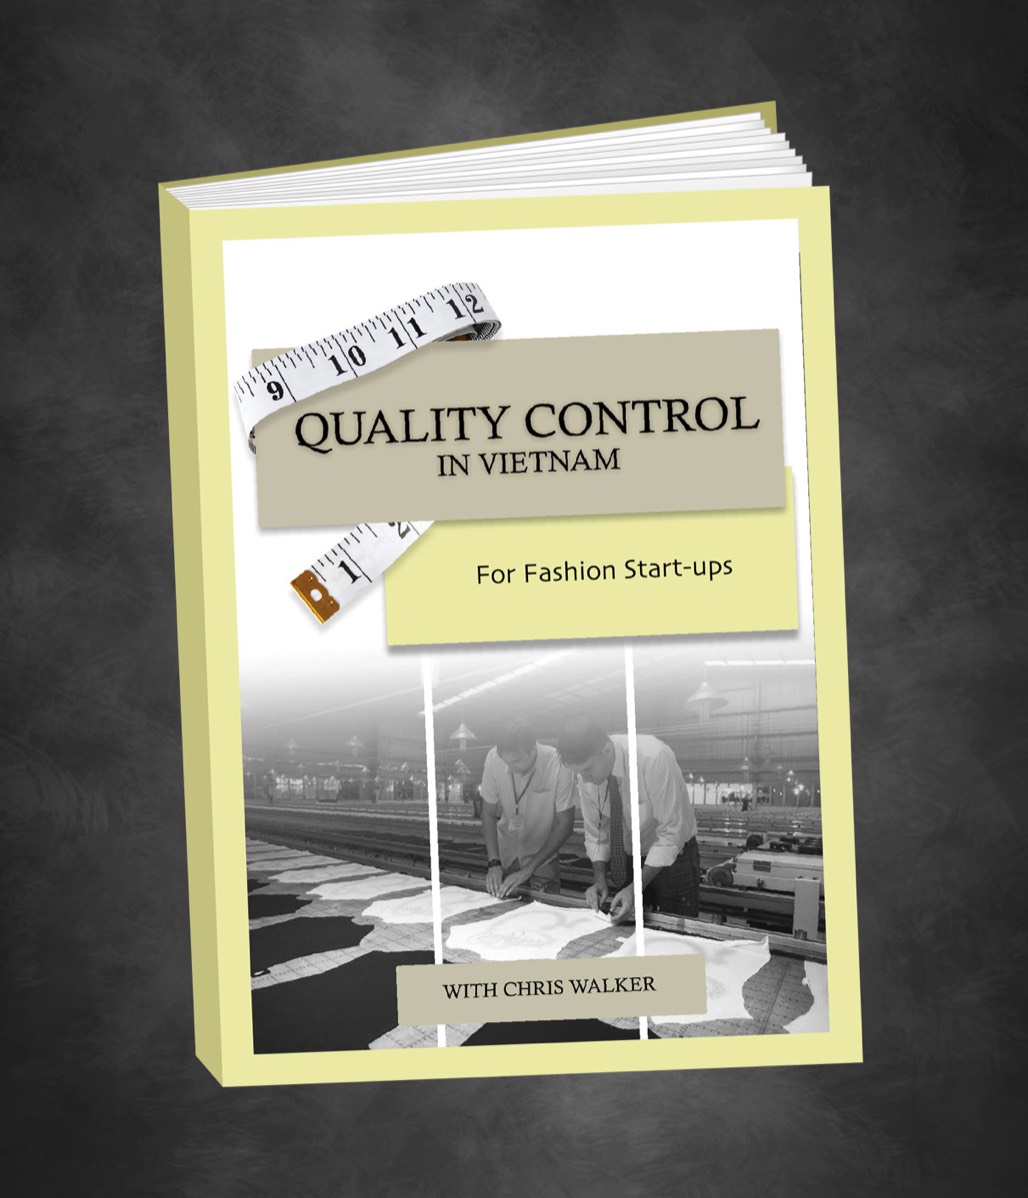 Learn Quality Control in Vietnam